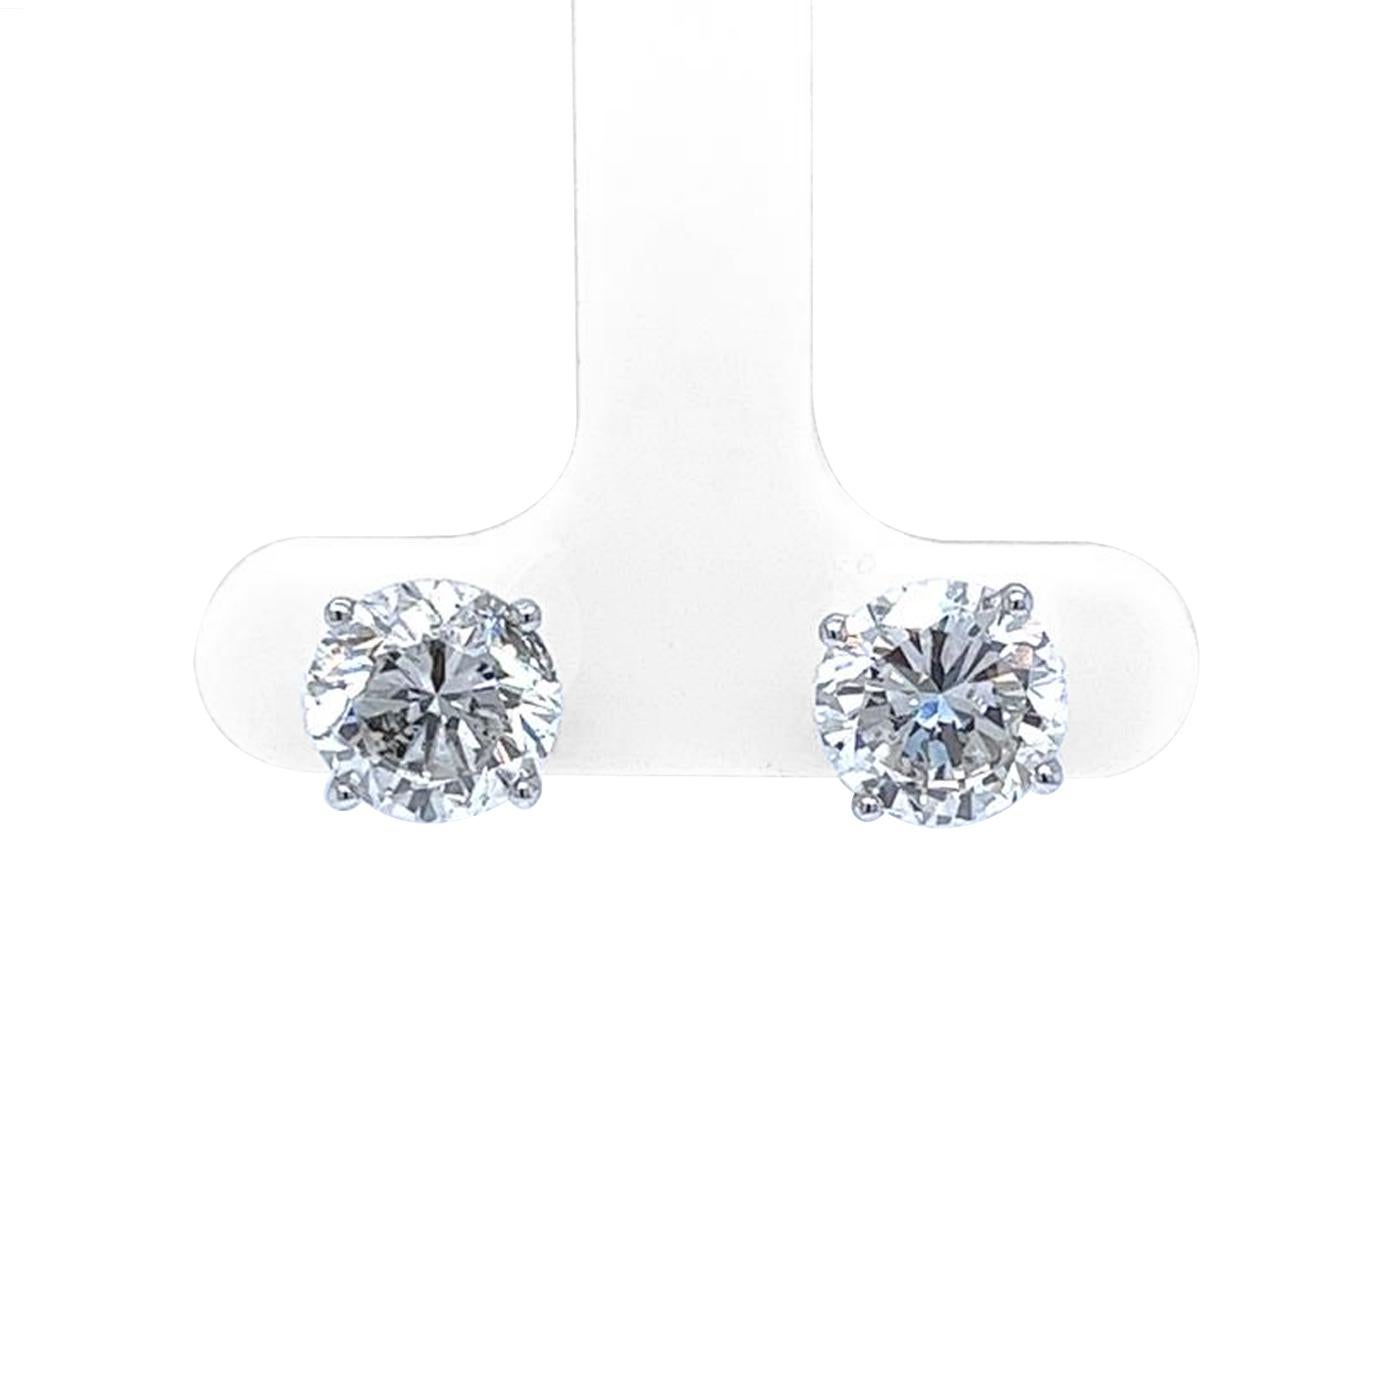 Round Cut 4.74ct Natural Round Diamond 4-Prong Martini Setting Stud Earrings Screw Back For Sale